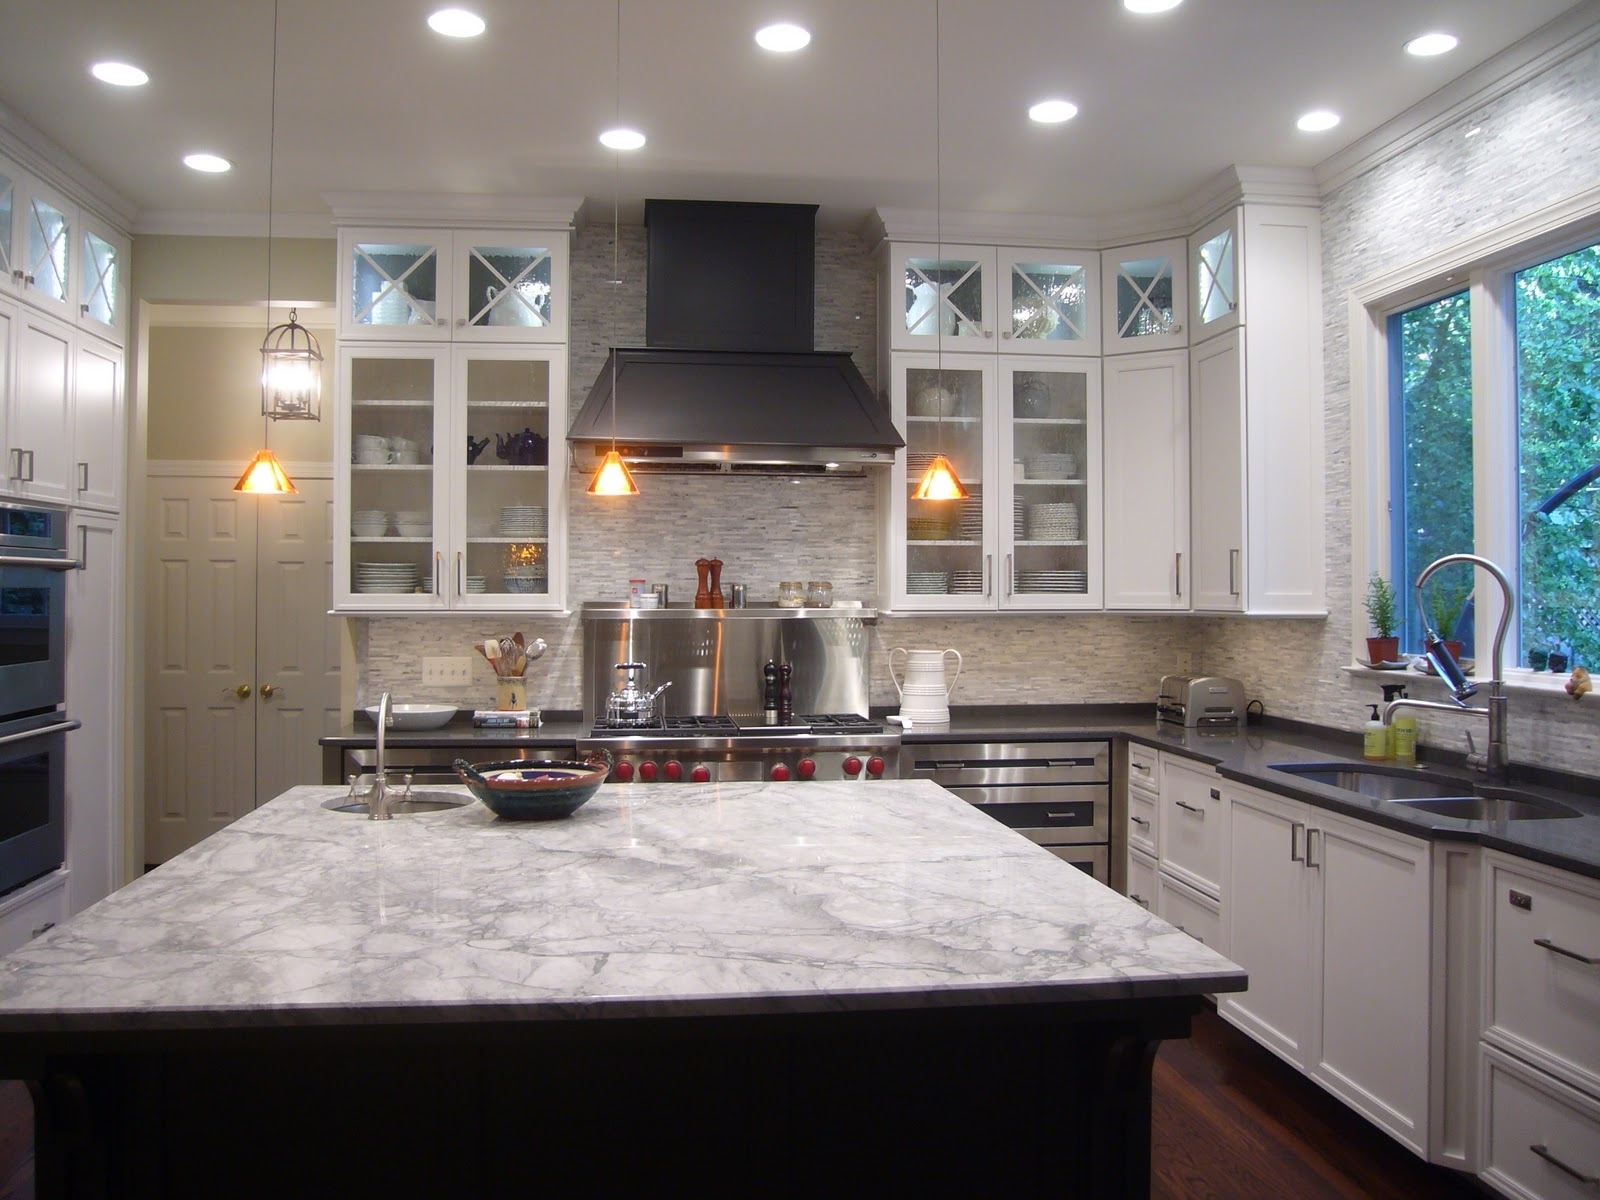 How To Get Affordable Kitchen Cabinets